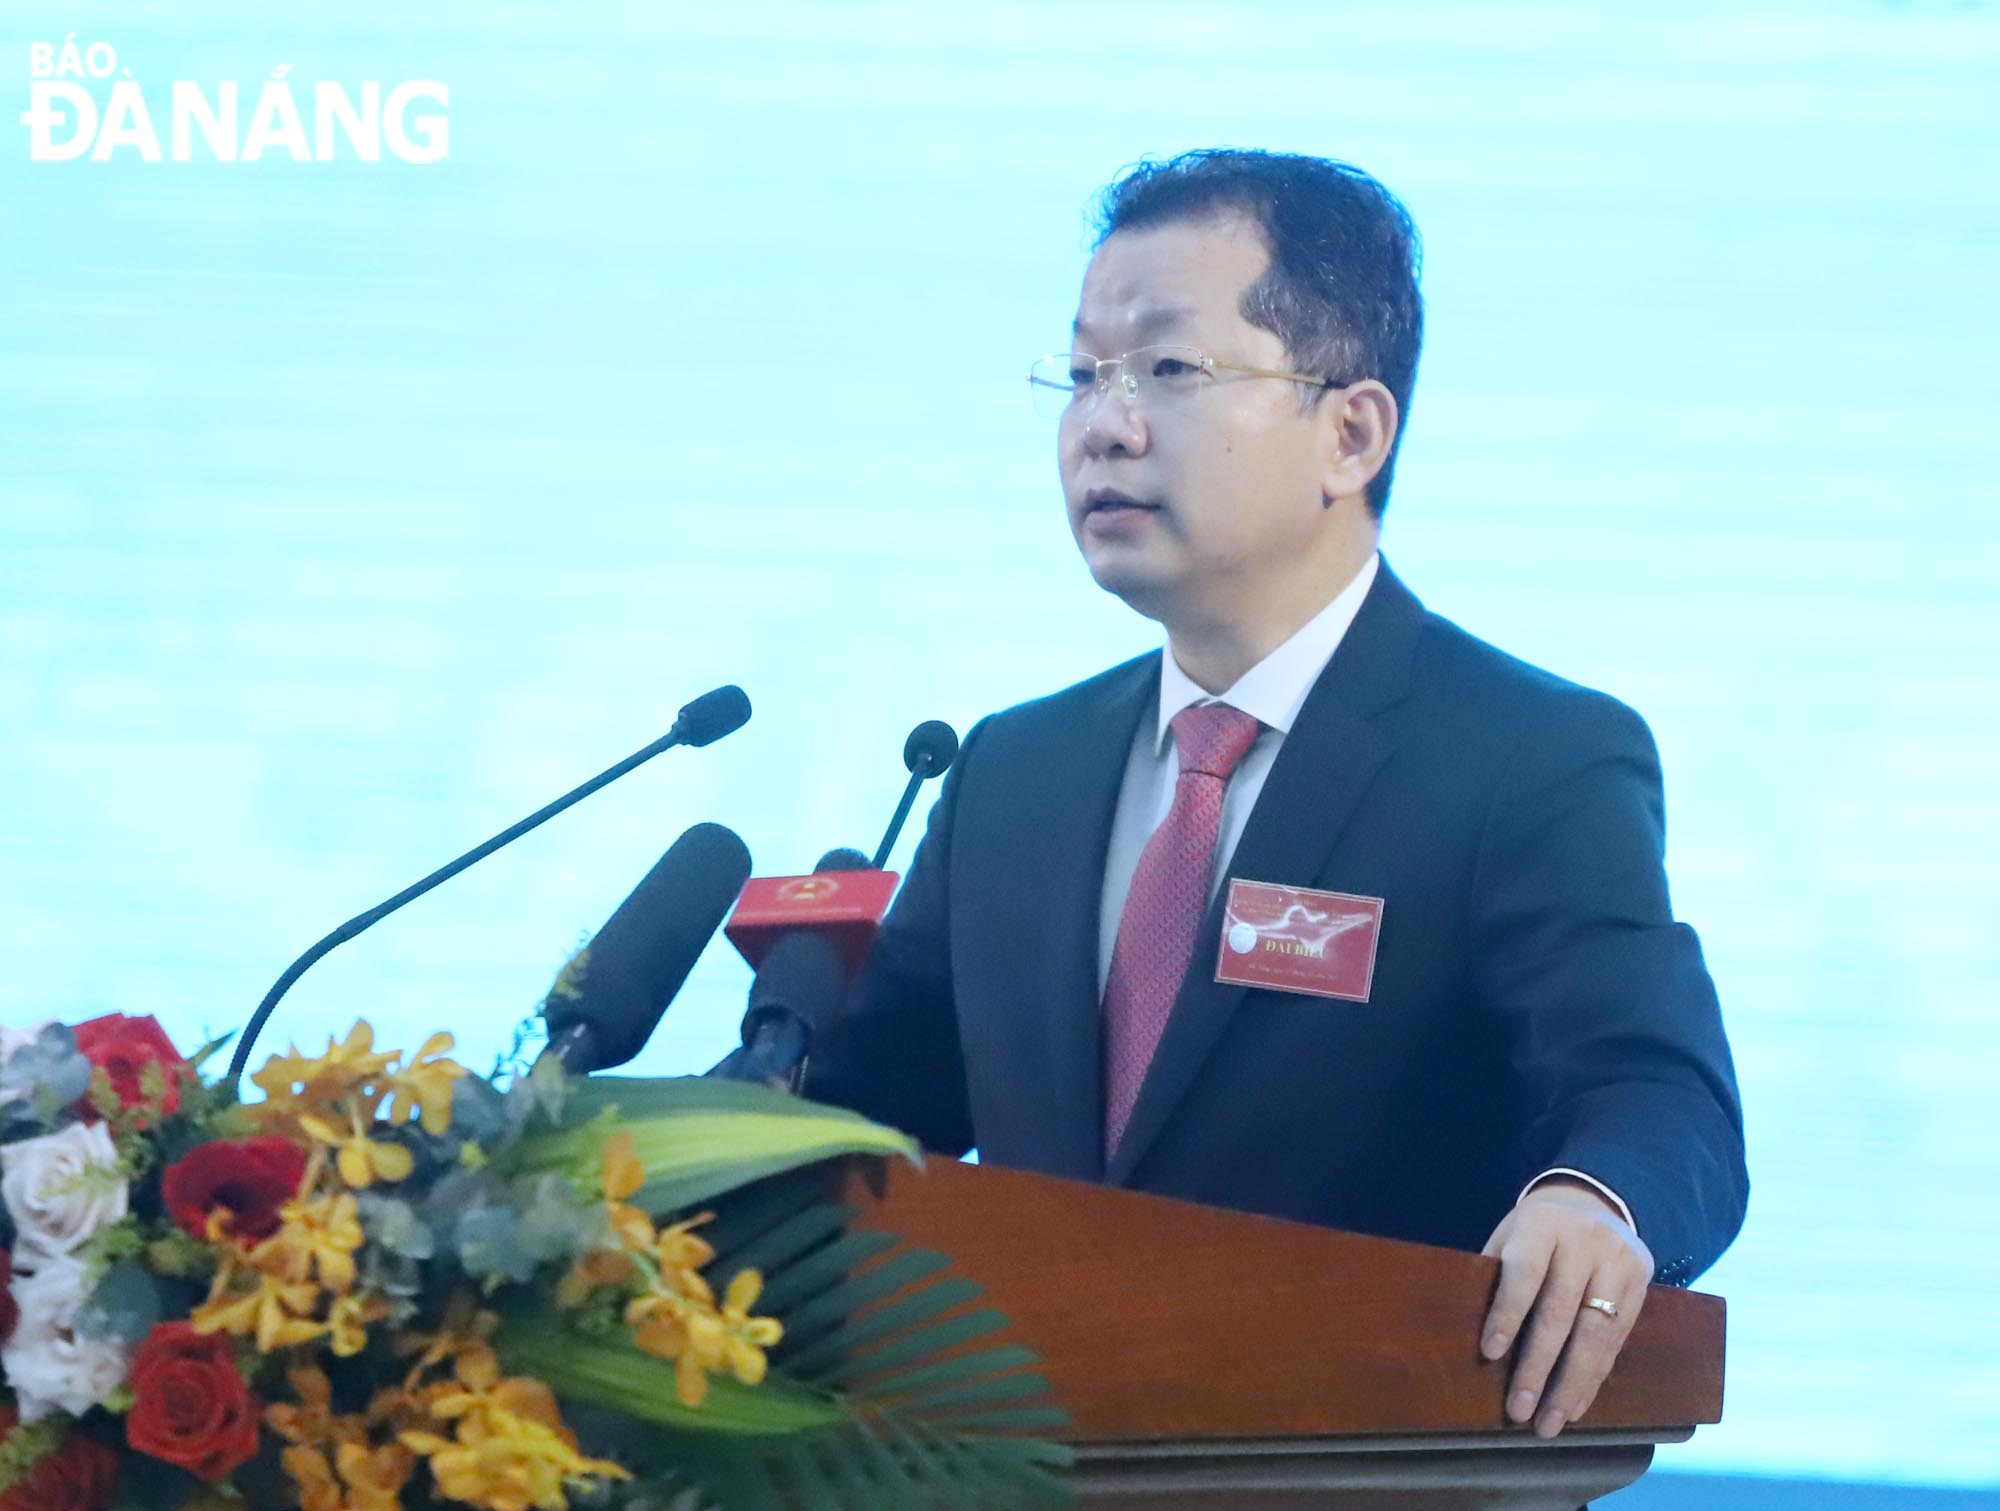 Secretary of the Da Nang Party Committee Nguyen Van Quang delivering his welcome speech at the event